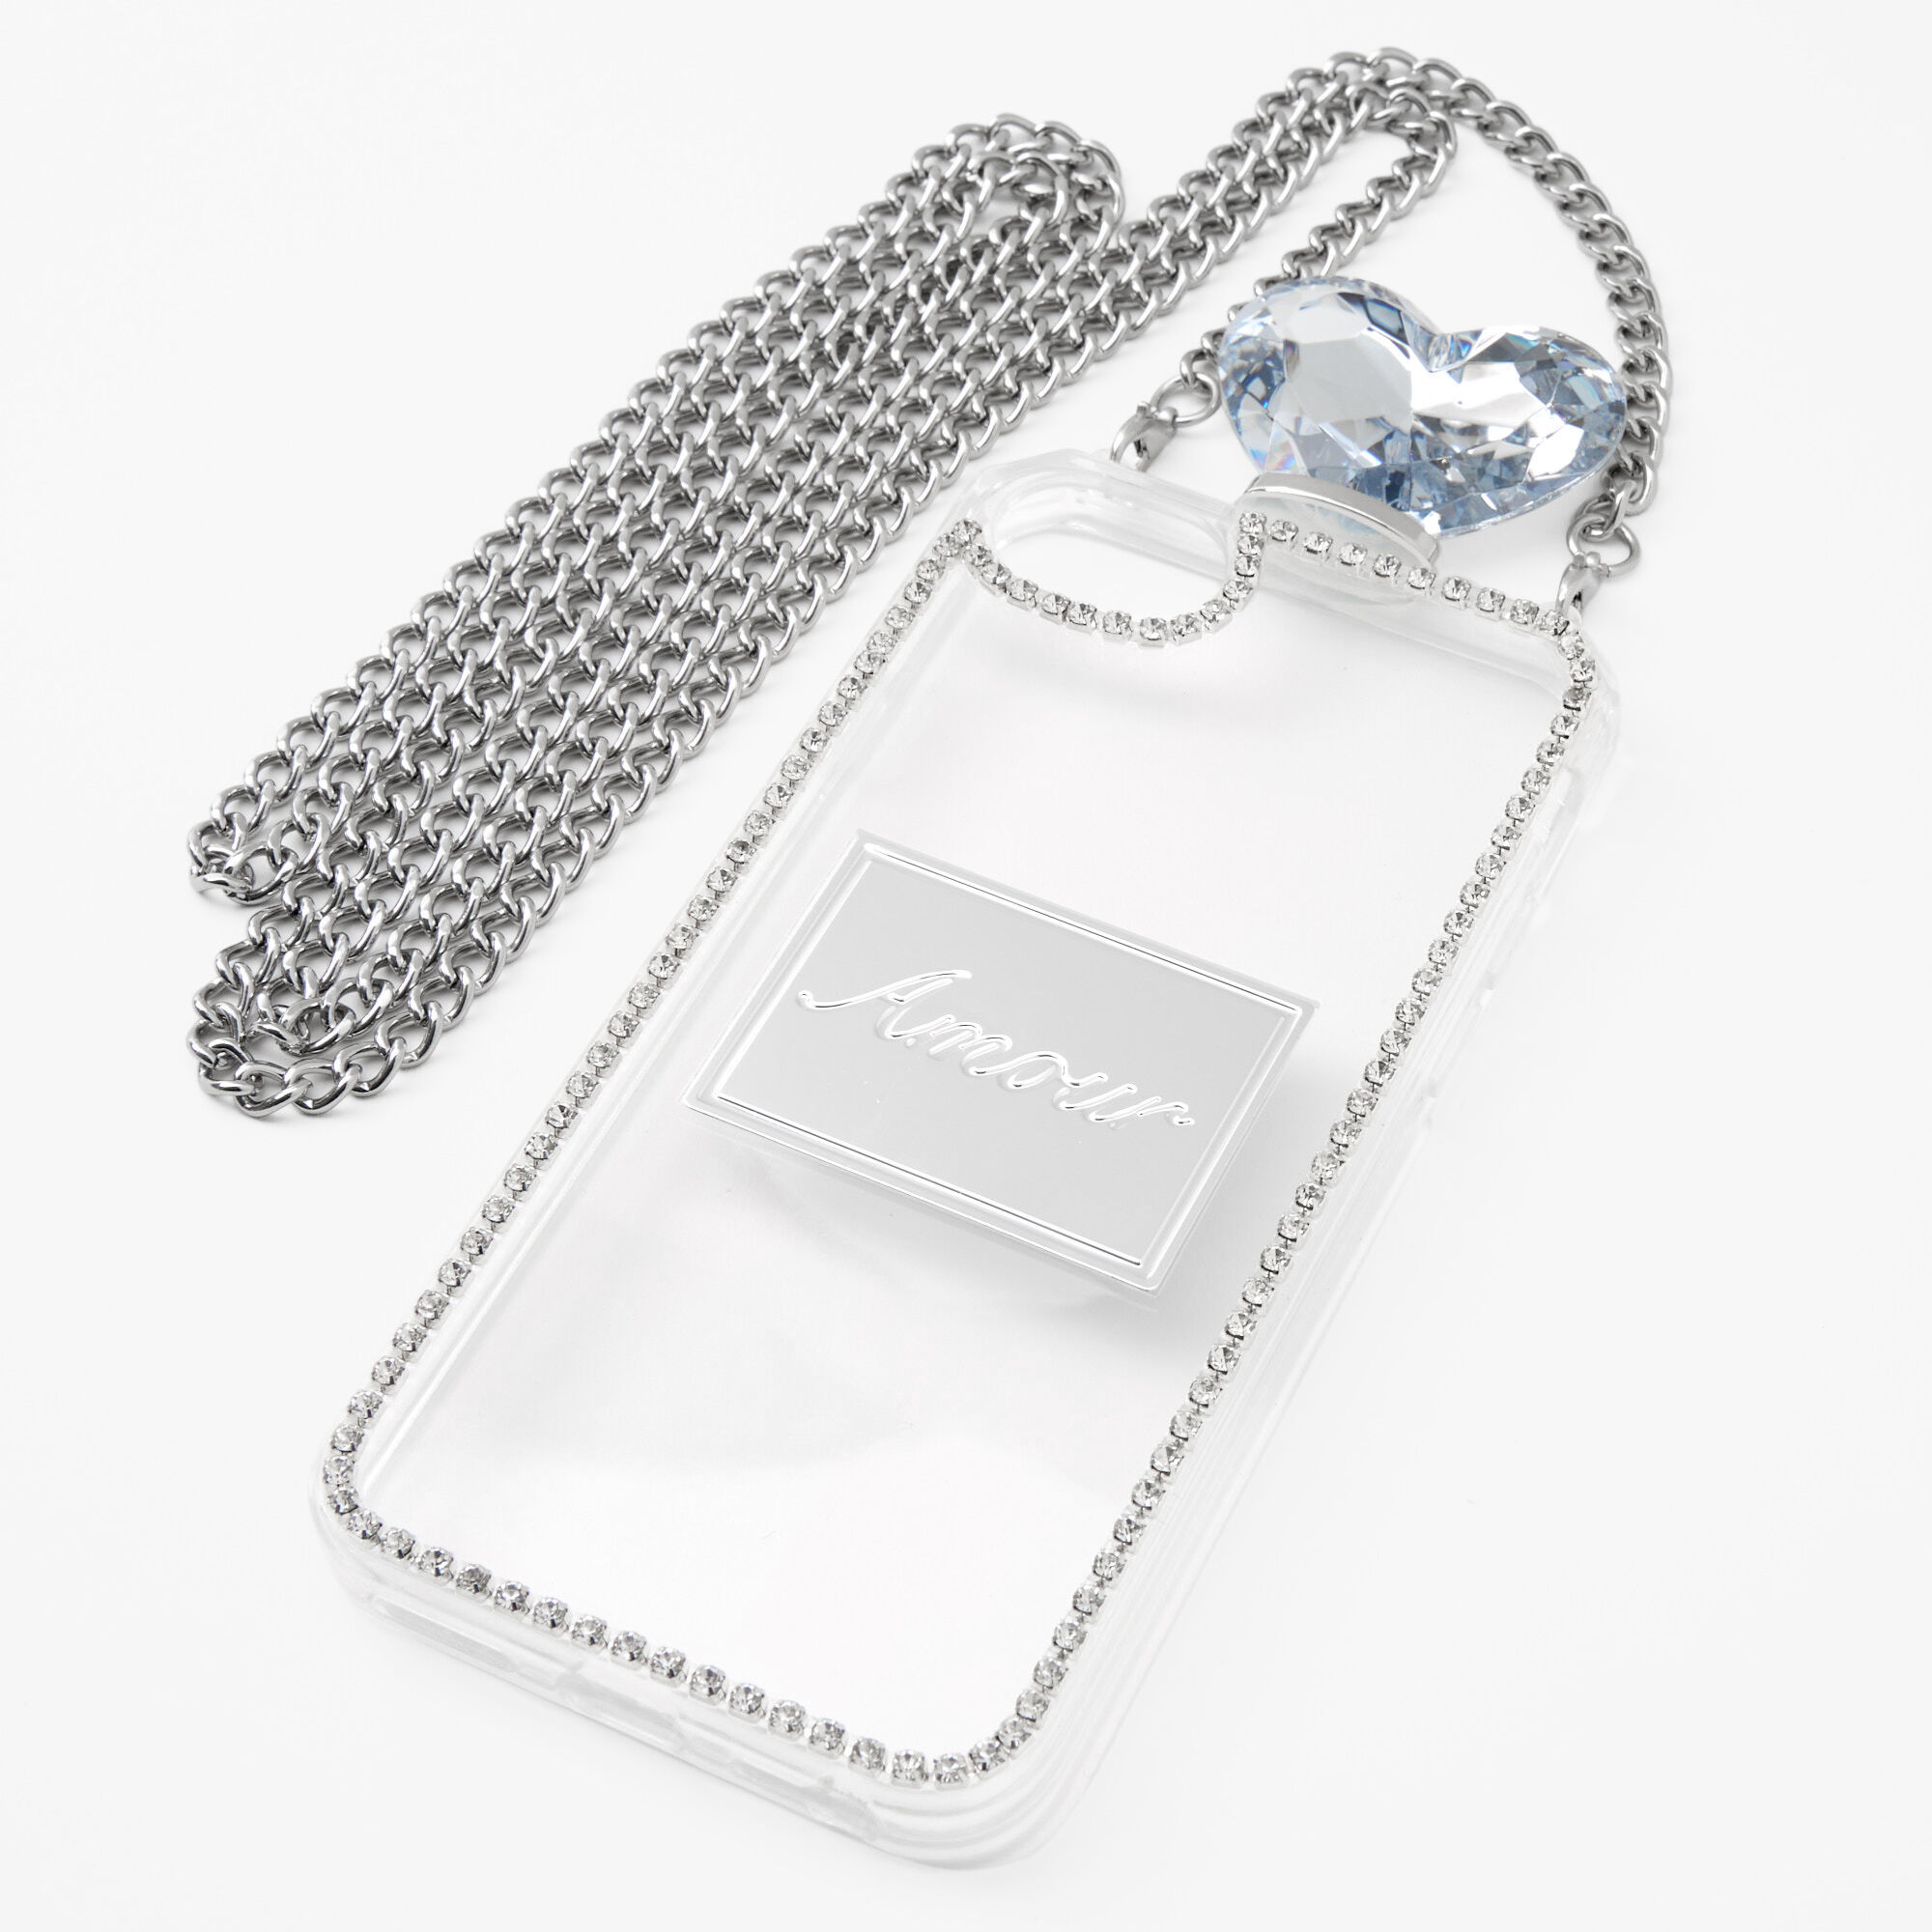 View Claires Rhinestone Phone Case With Chain Fits Iphone 678se Silver information